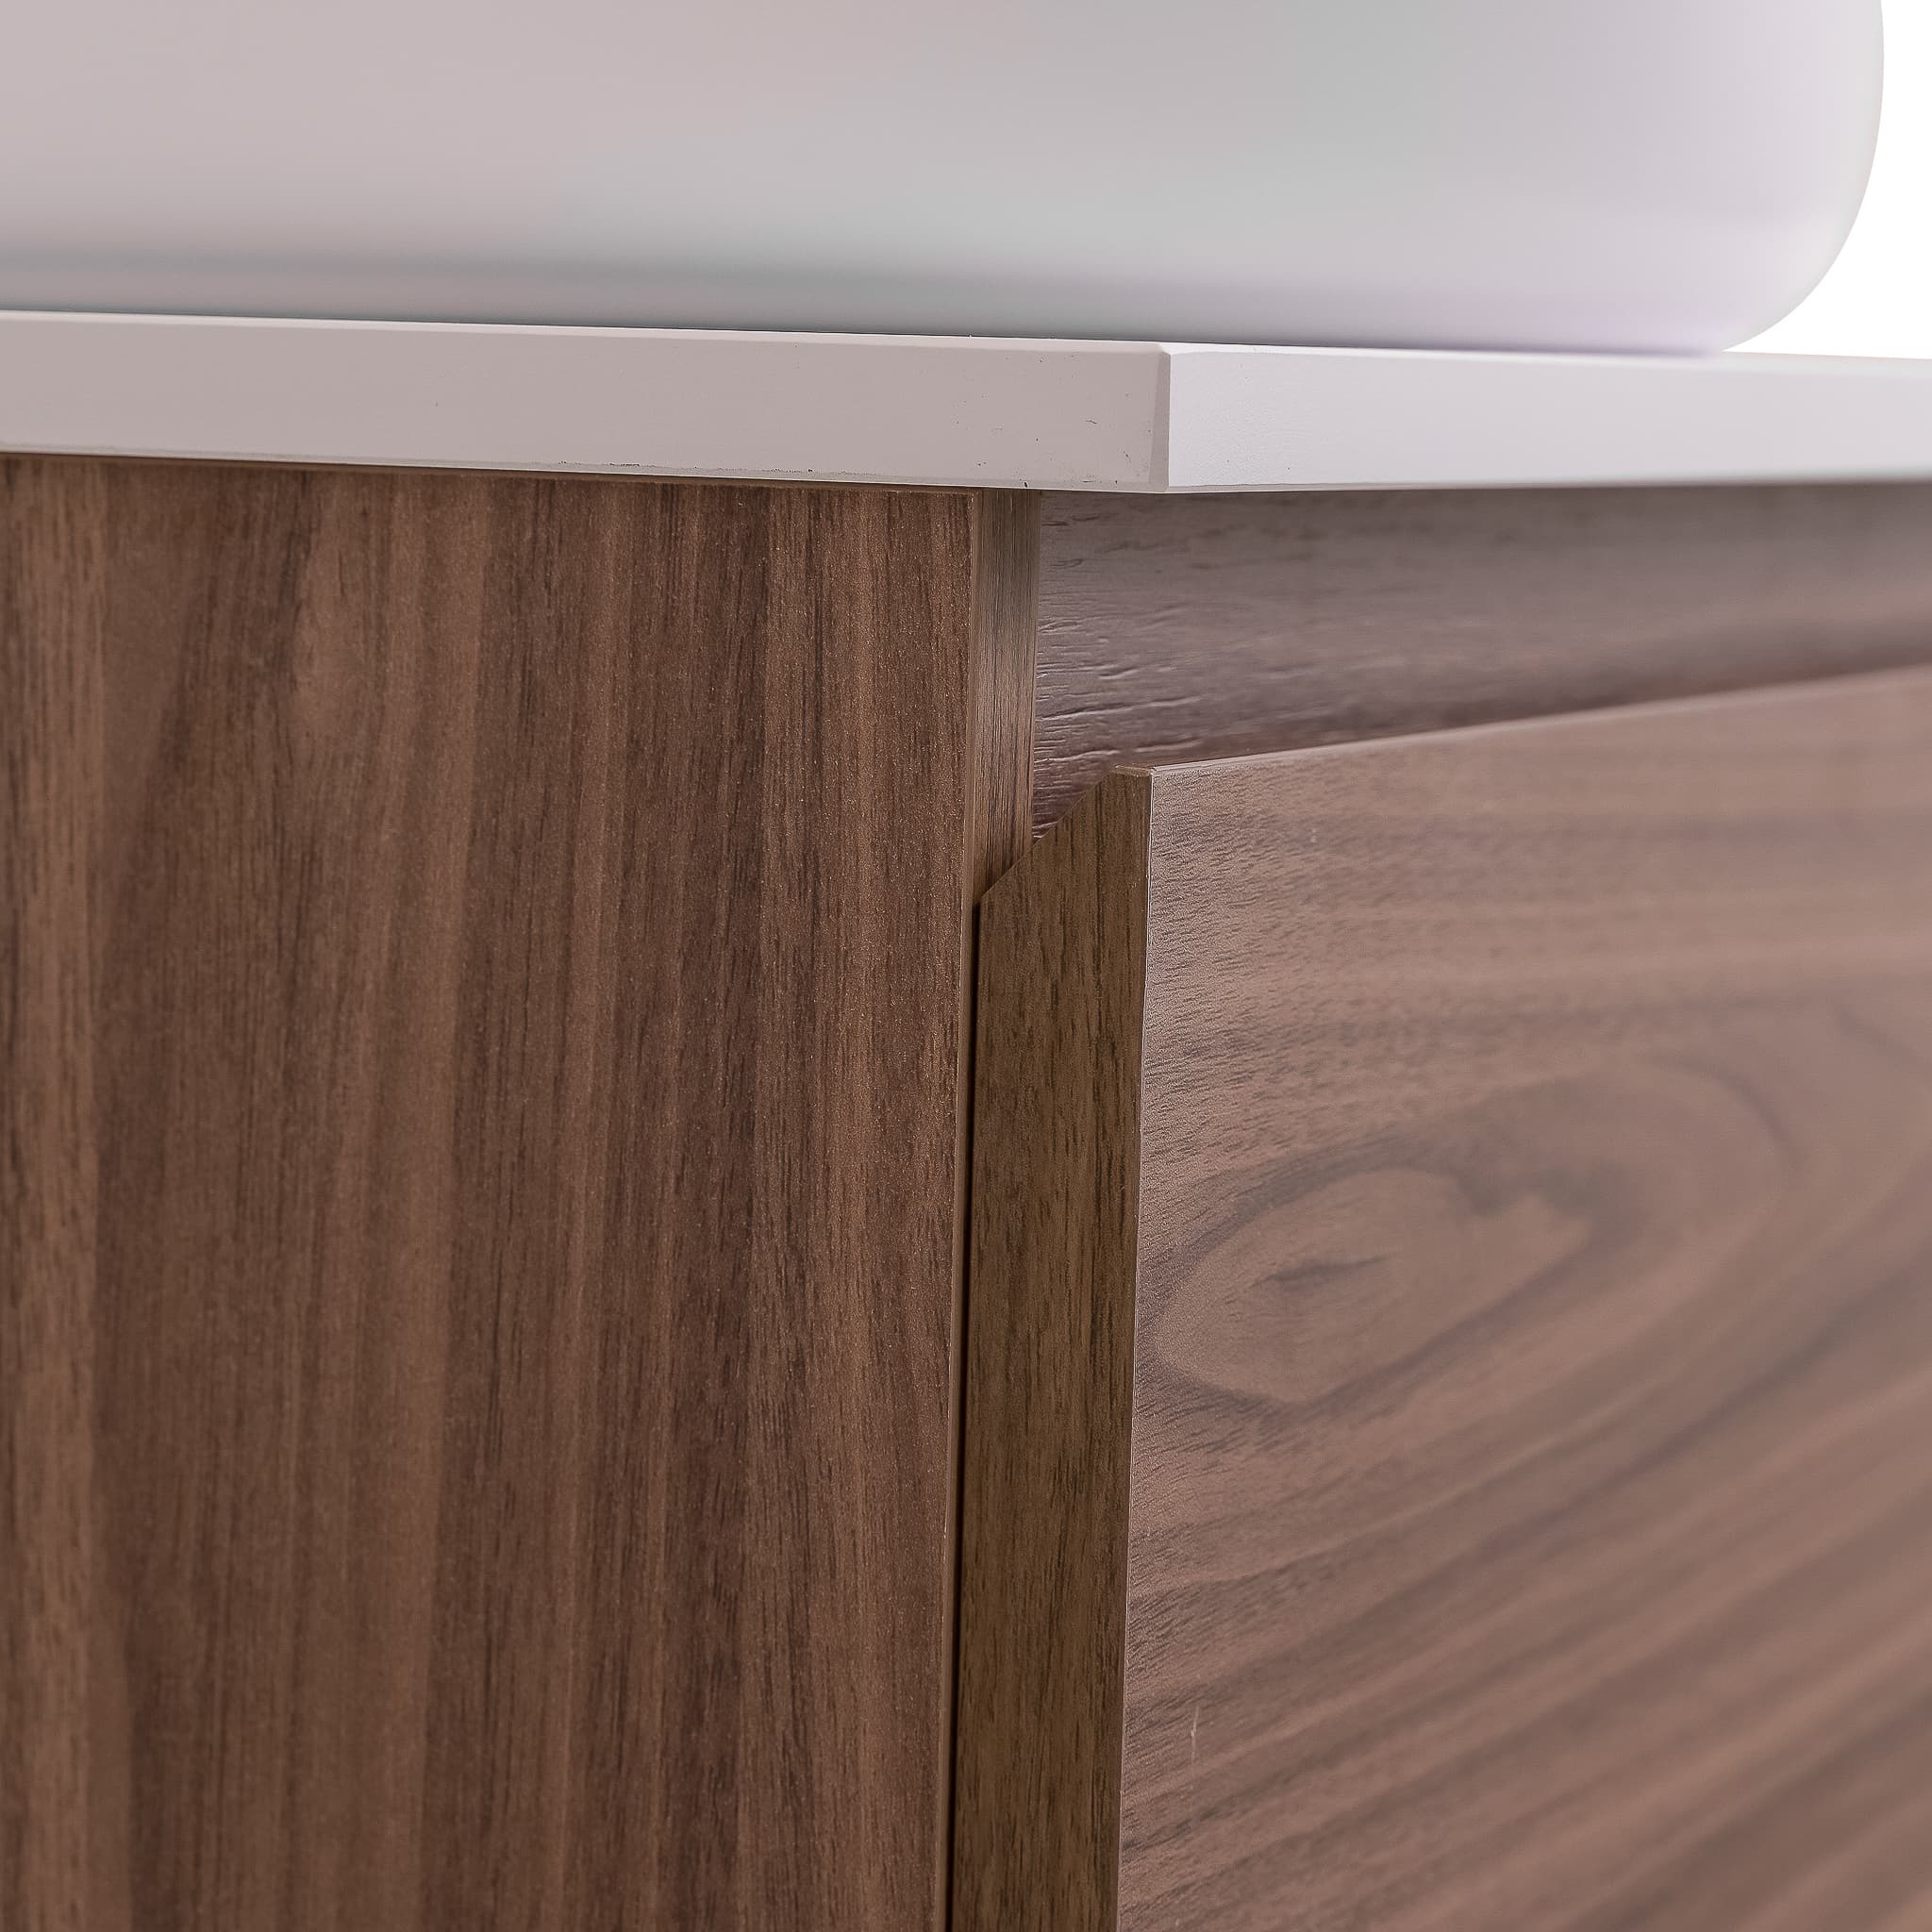 Venice 23.5 Walnut Wood Texture Cabinet, Ares White Top And Ares White Ceramic Basin, Wall Mounted Modern Vanity Set